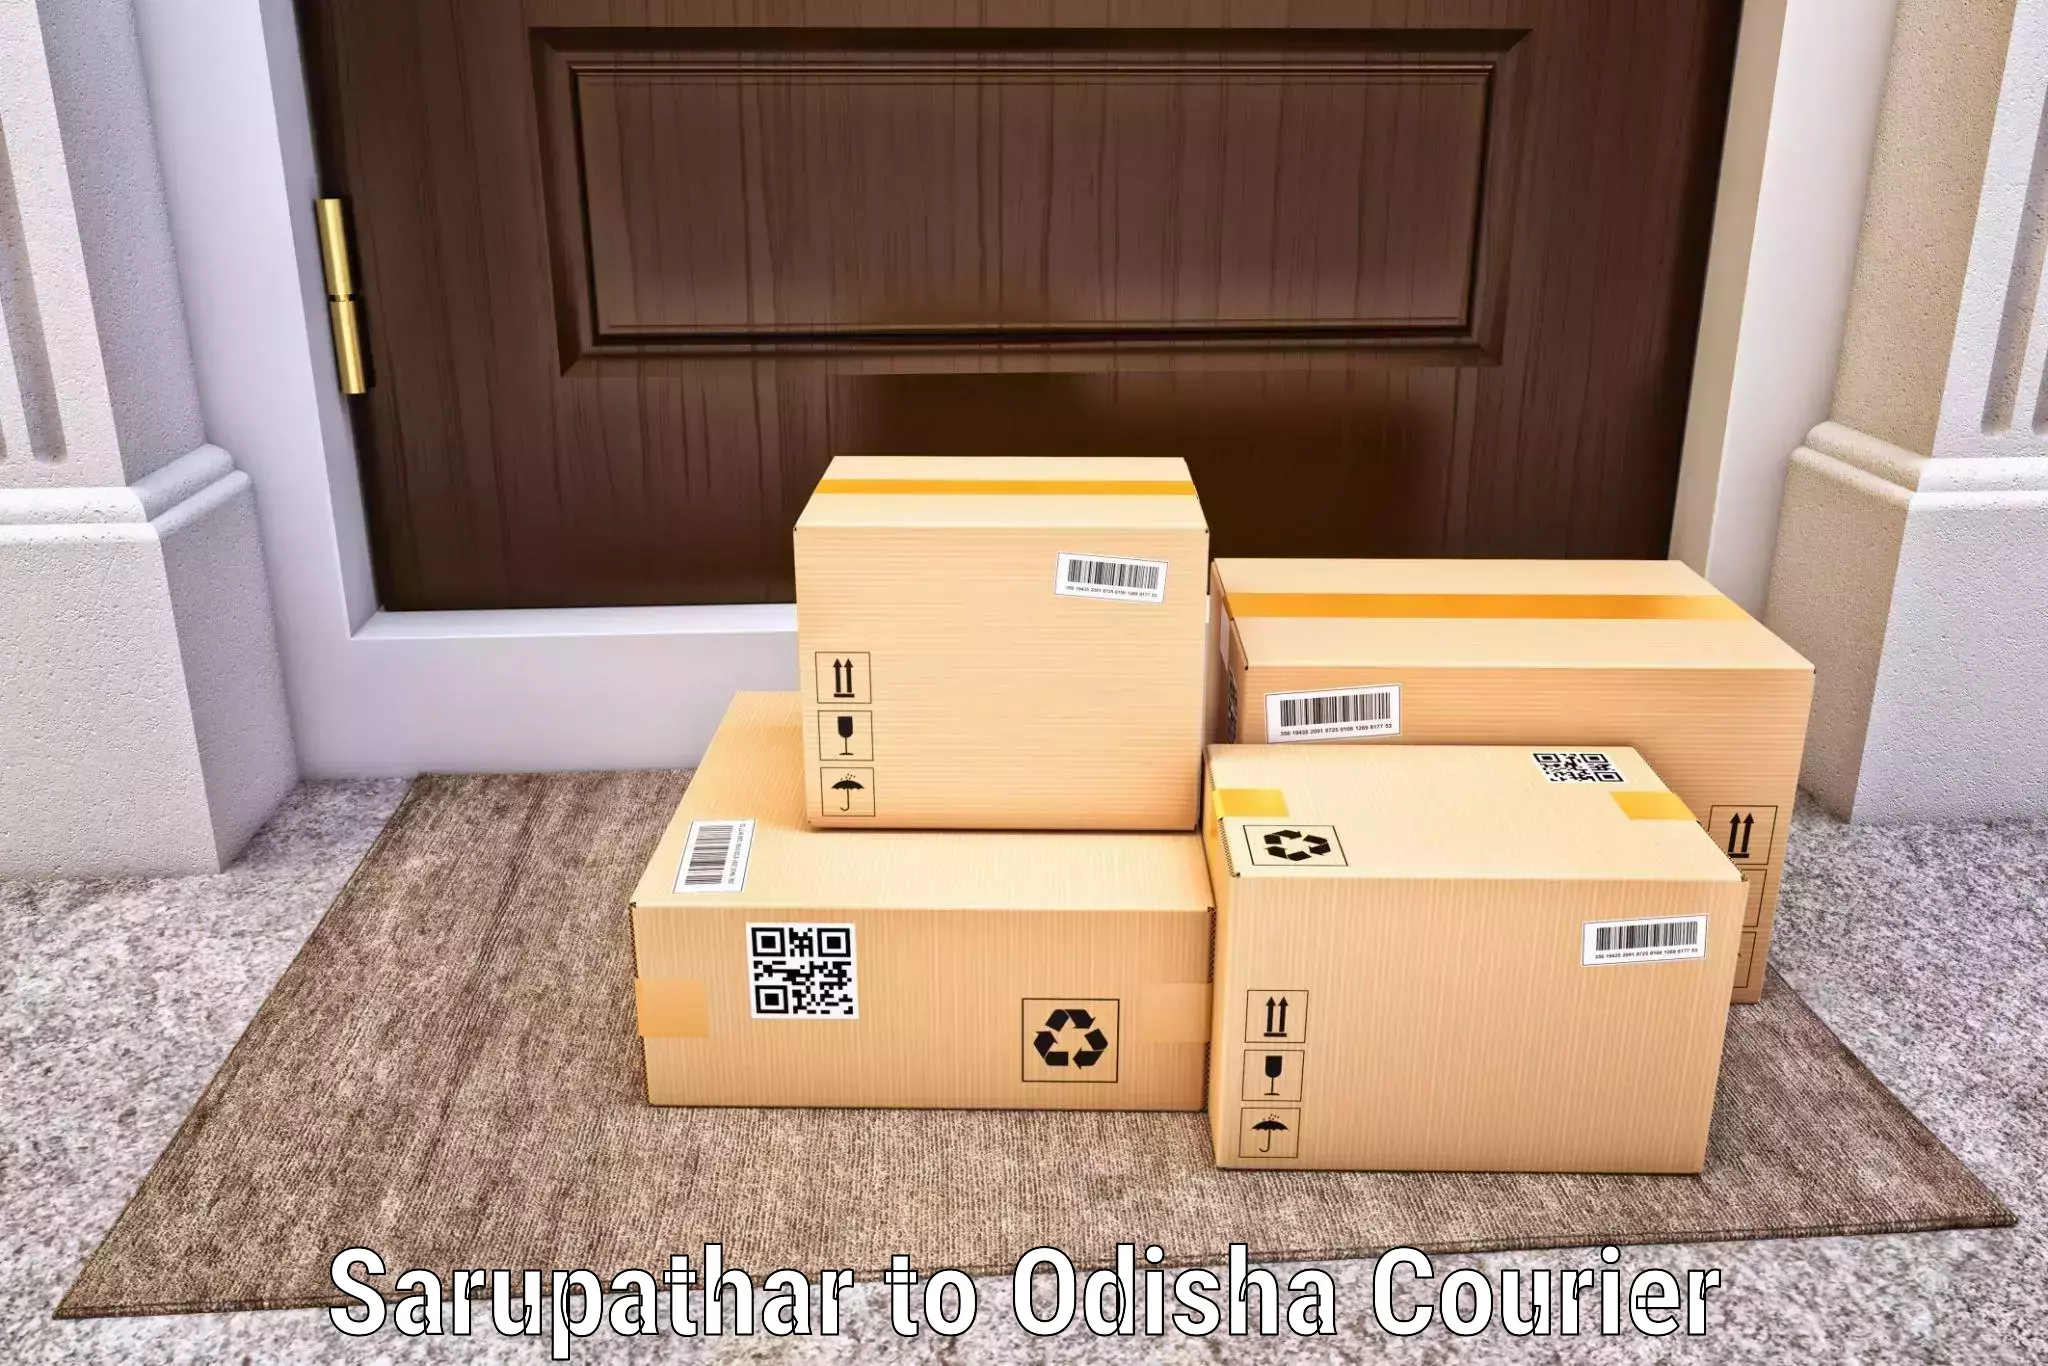 Customer-oriented courier services Sarupathar to Jaipatna